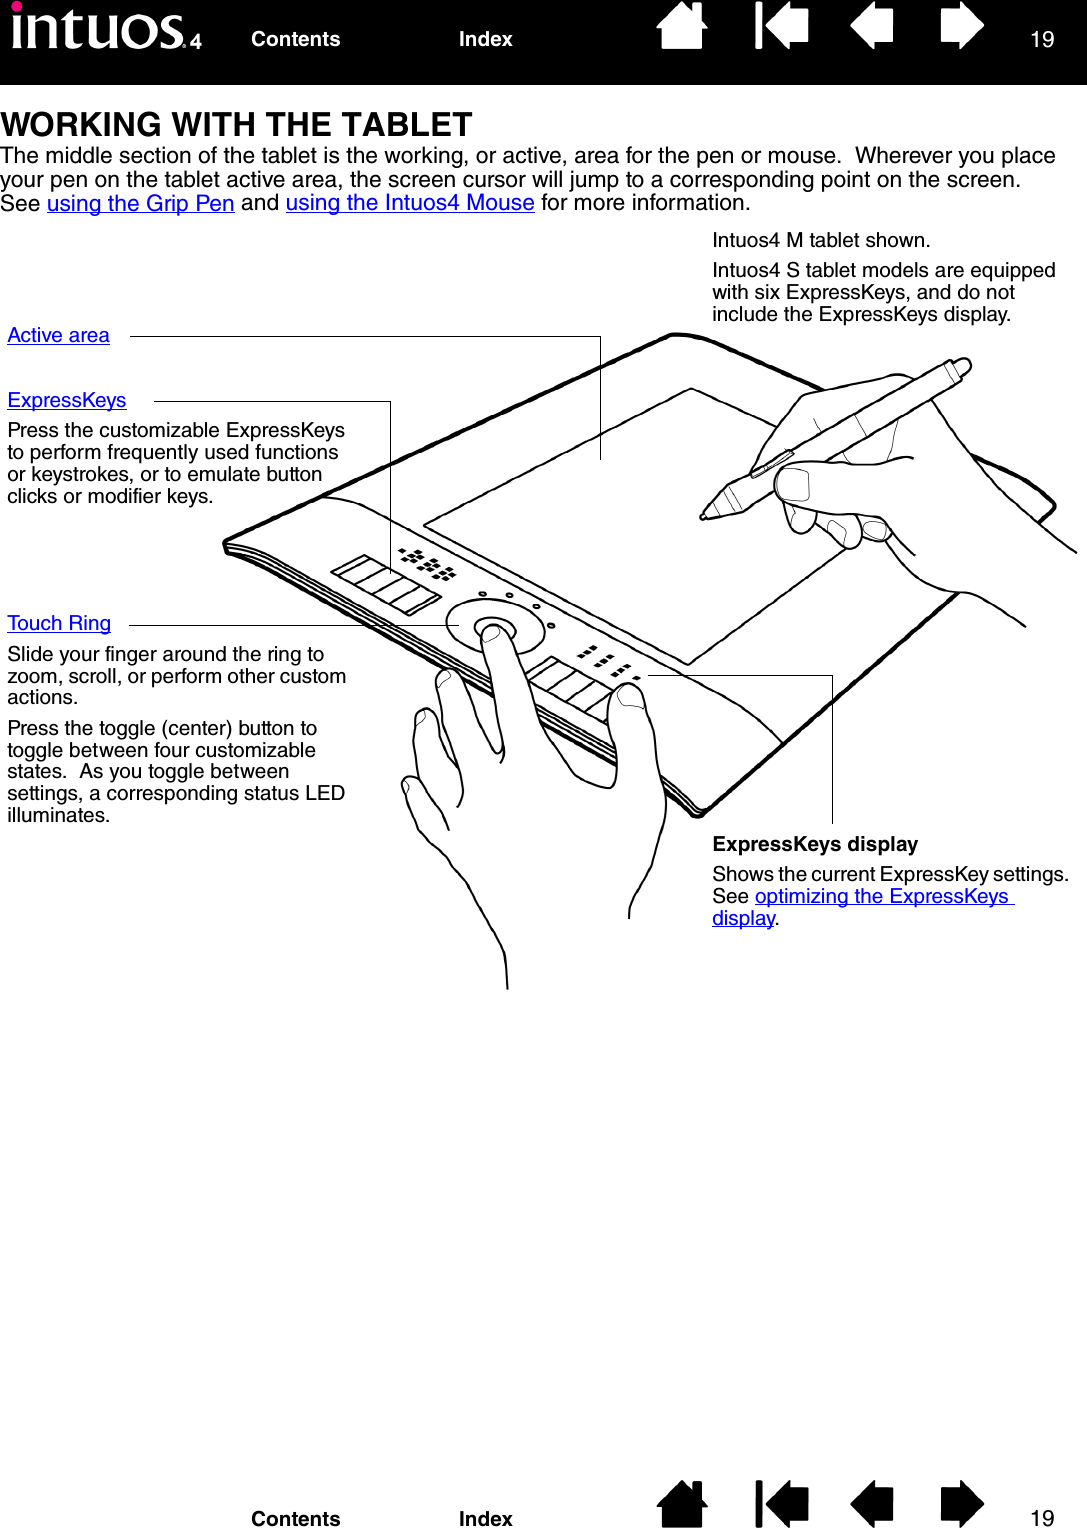 1919IndexContentsIndexContentsWORKING WITH THE TABLETThe middle section of the tablet is the working, or active, area for the pen or mouse.  Wherever you place your pen on the tablet active area, the screen cursor will jump to a corresponding point on the screen.  See using the Grip Pen and using the Intuos4 Mouse for more information.Active areaExpressKeysPress the customizable ExpressKeys to perform frequently used functions or keystrokes, or to emulate button clicks or modifier keys.Intuos4 M tablet shown.Intuos4 S tablet models are equipped with six ExpressKeys, and do not include the ExpressKeys display.Touch RingSlide your finger around the ring to zoom, scroll, or perform other custom actions.Press the toggle (center) button to toggle between four customizable states.  As you toggle between settings, a corresponding status LED illuminates.ExpressKeys displayShows the current ExpressKey settings.  See optimizing the ExpressKeys display.